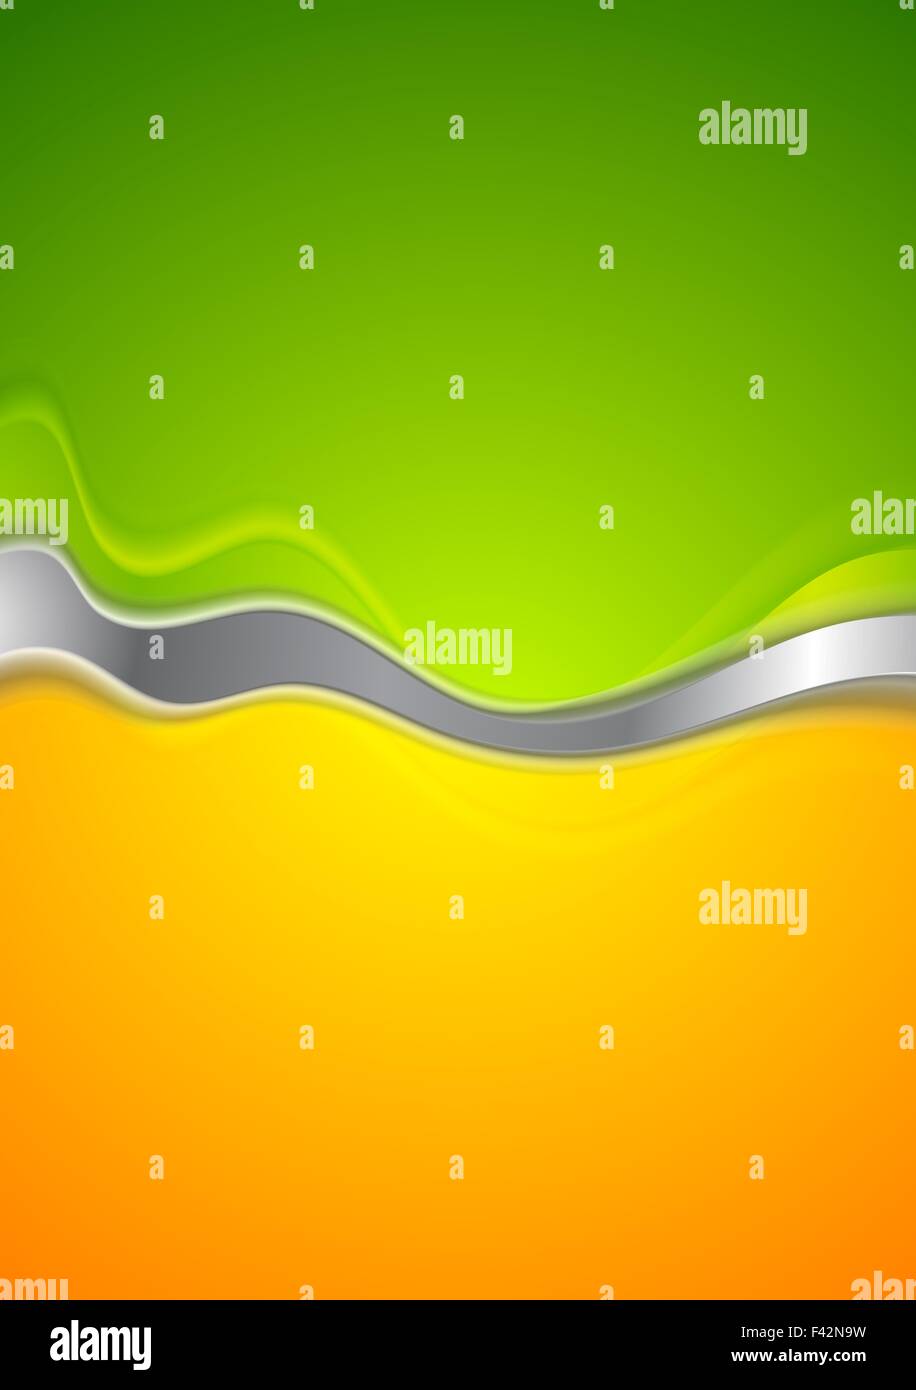 Abstract green and orange background Stock Photo - Alamy